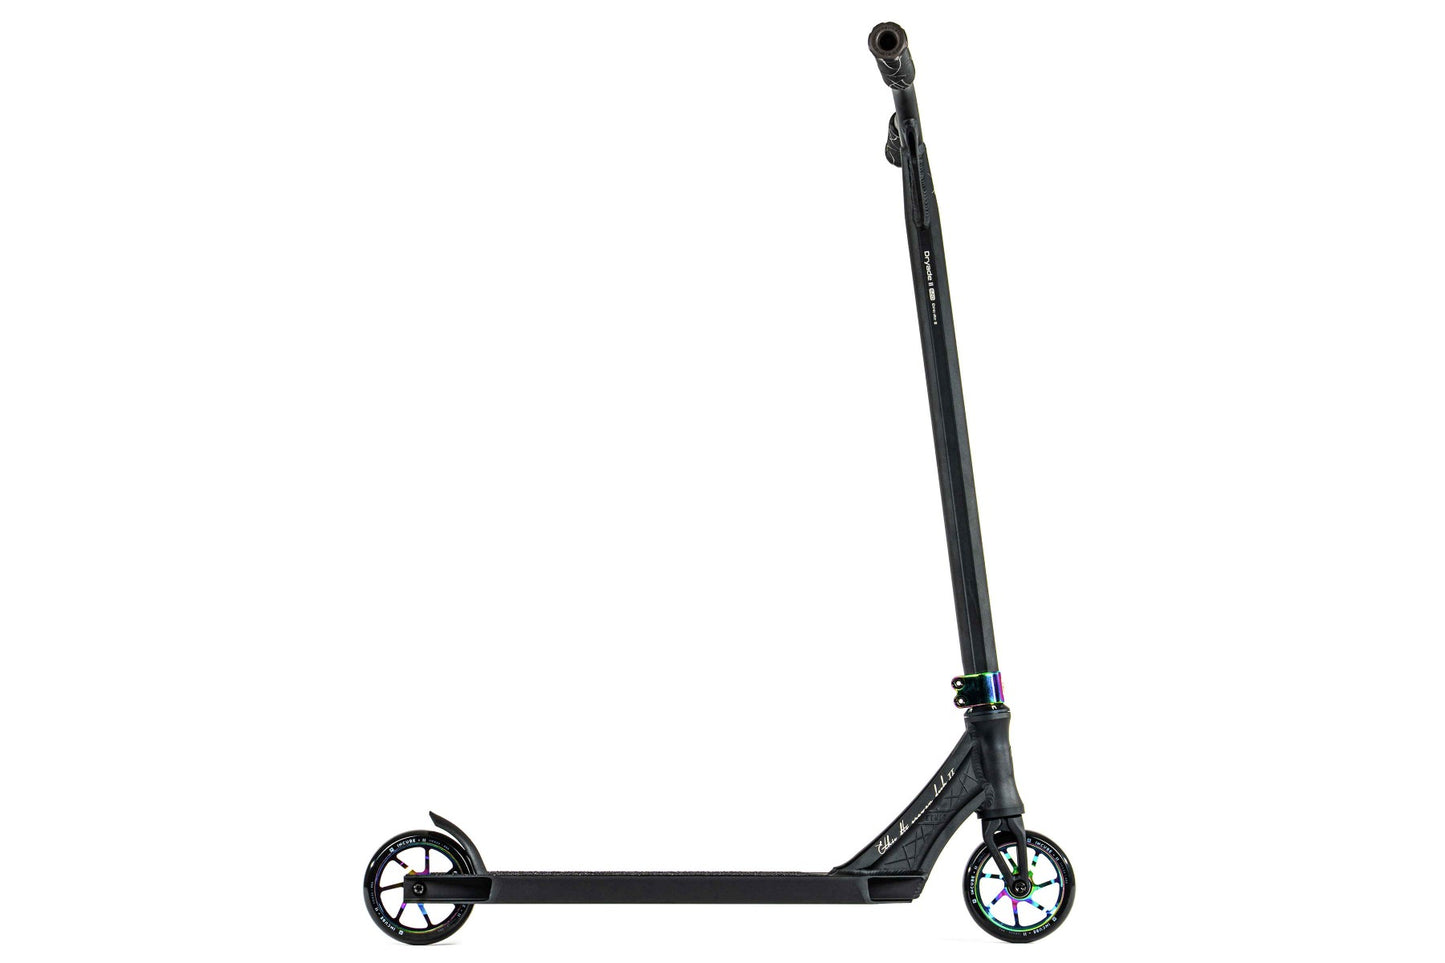 Ethic DTC Erawan V2 Complete Stunt Scooter (M) - Neochrome - Side